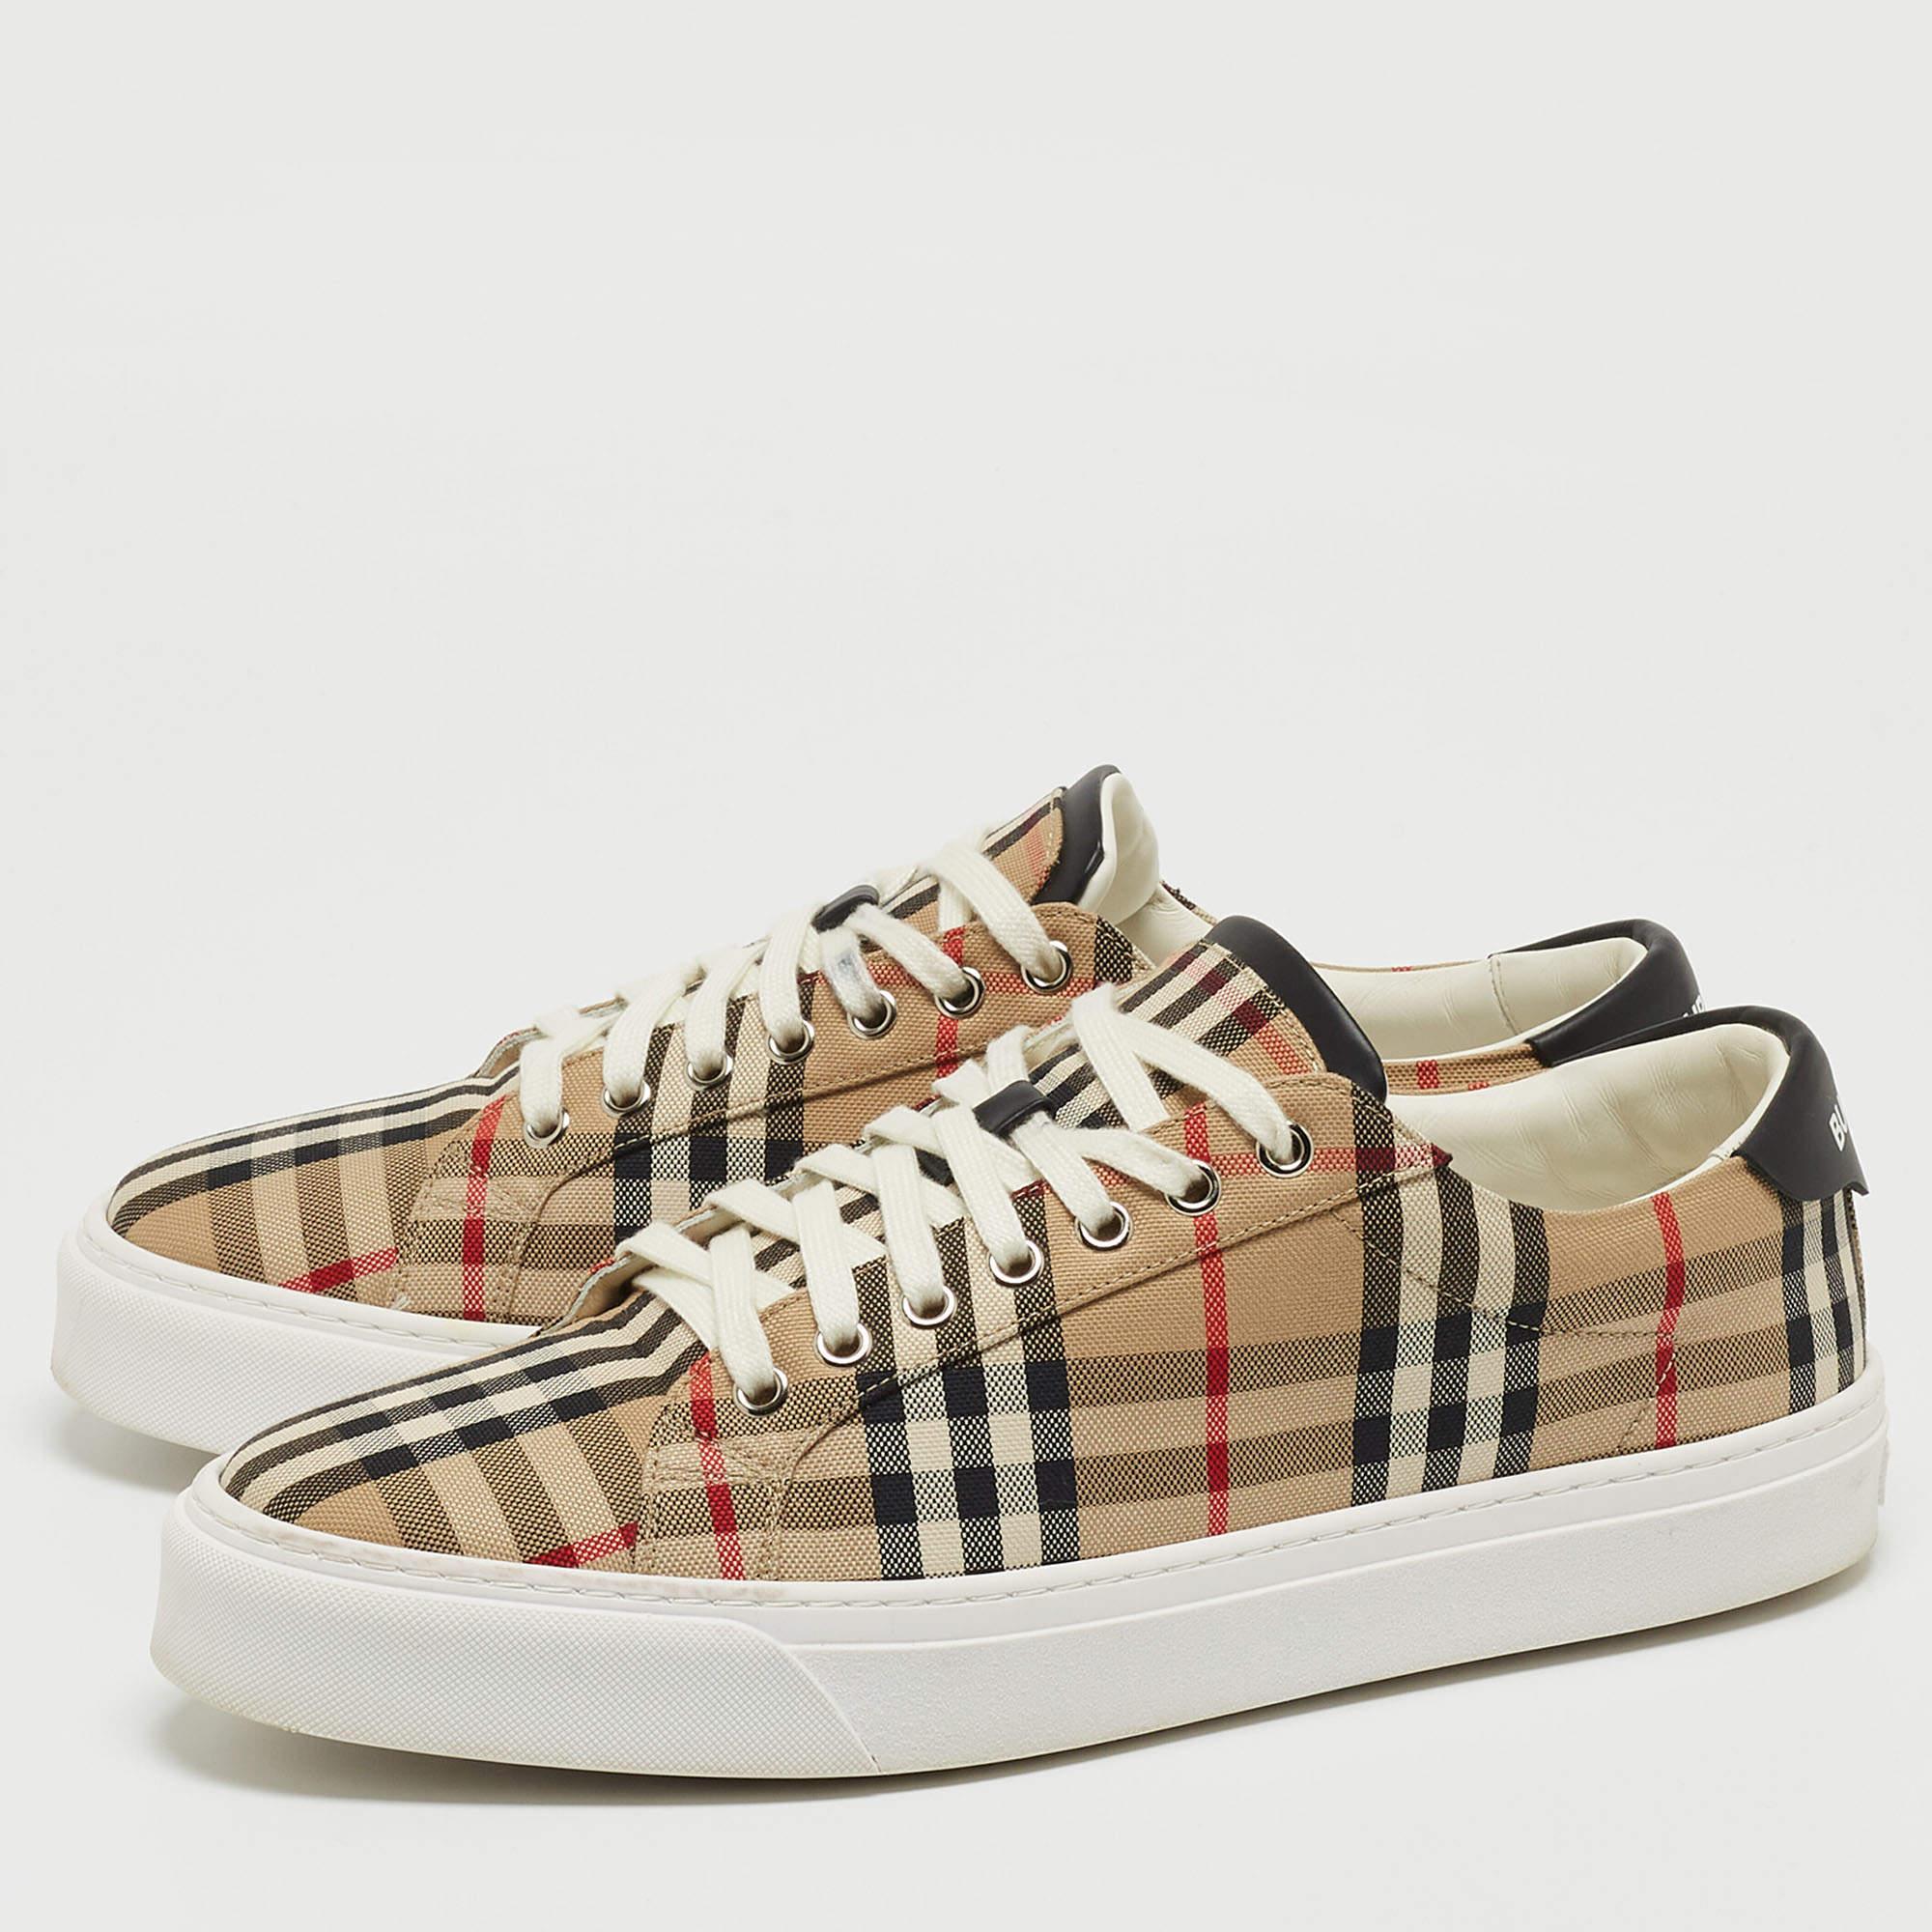 Burberry Beige Check Canvas Low Top Sneakers Size 43 4